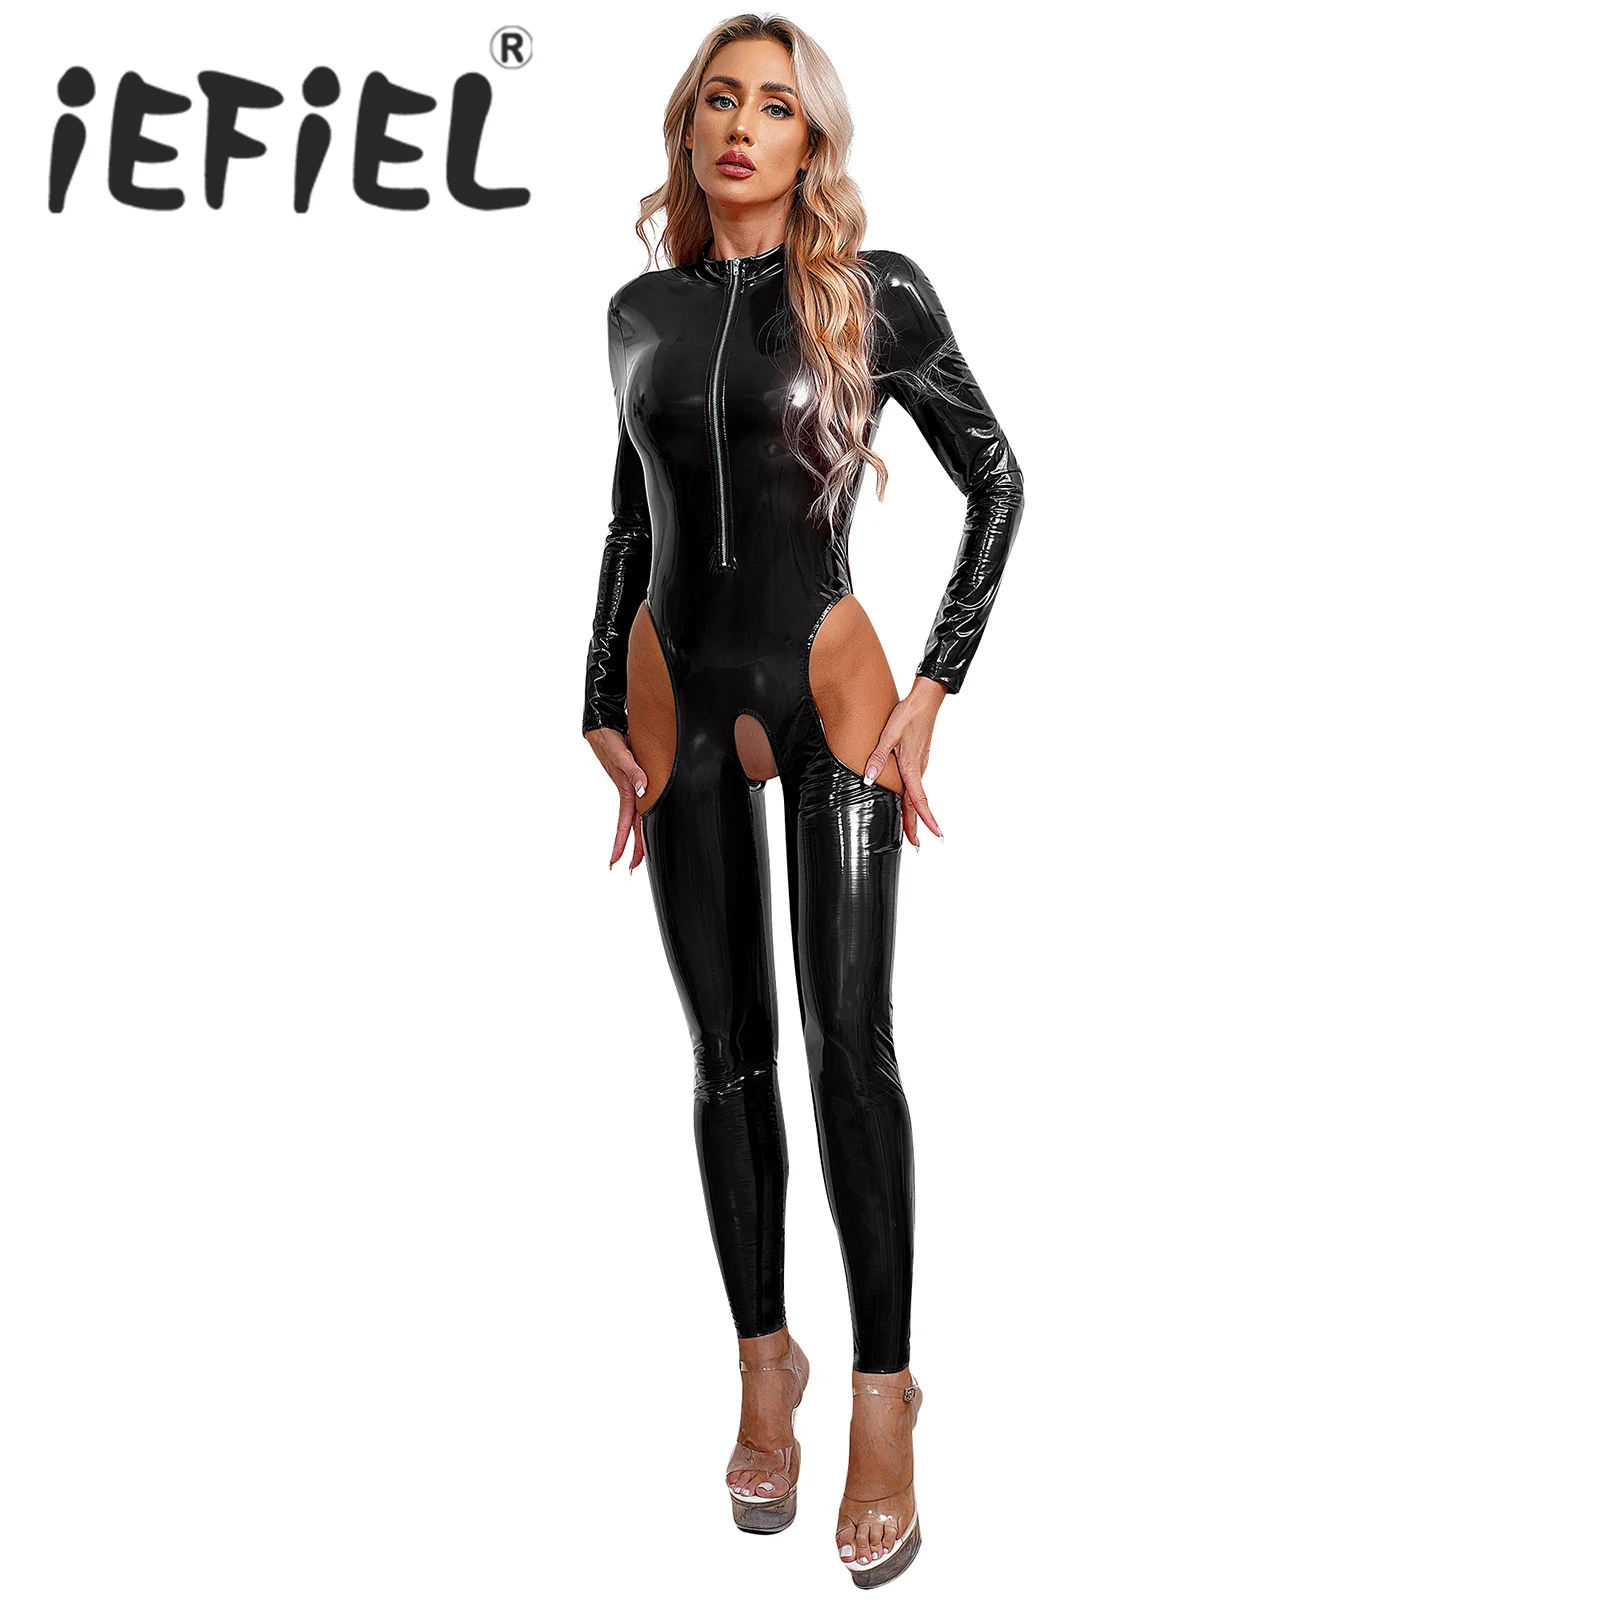 

Womens Wetlook Jumpsuit Cutout Crotch Patent Leather Stand Collar Crotchless Catsuit Wet Look Clubwear Party Full Body Bodysuit